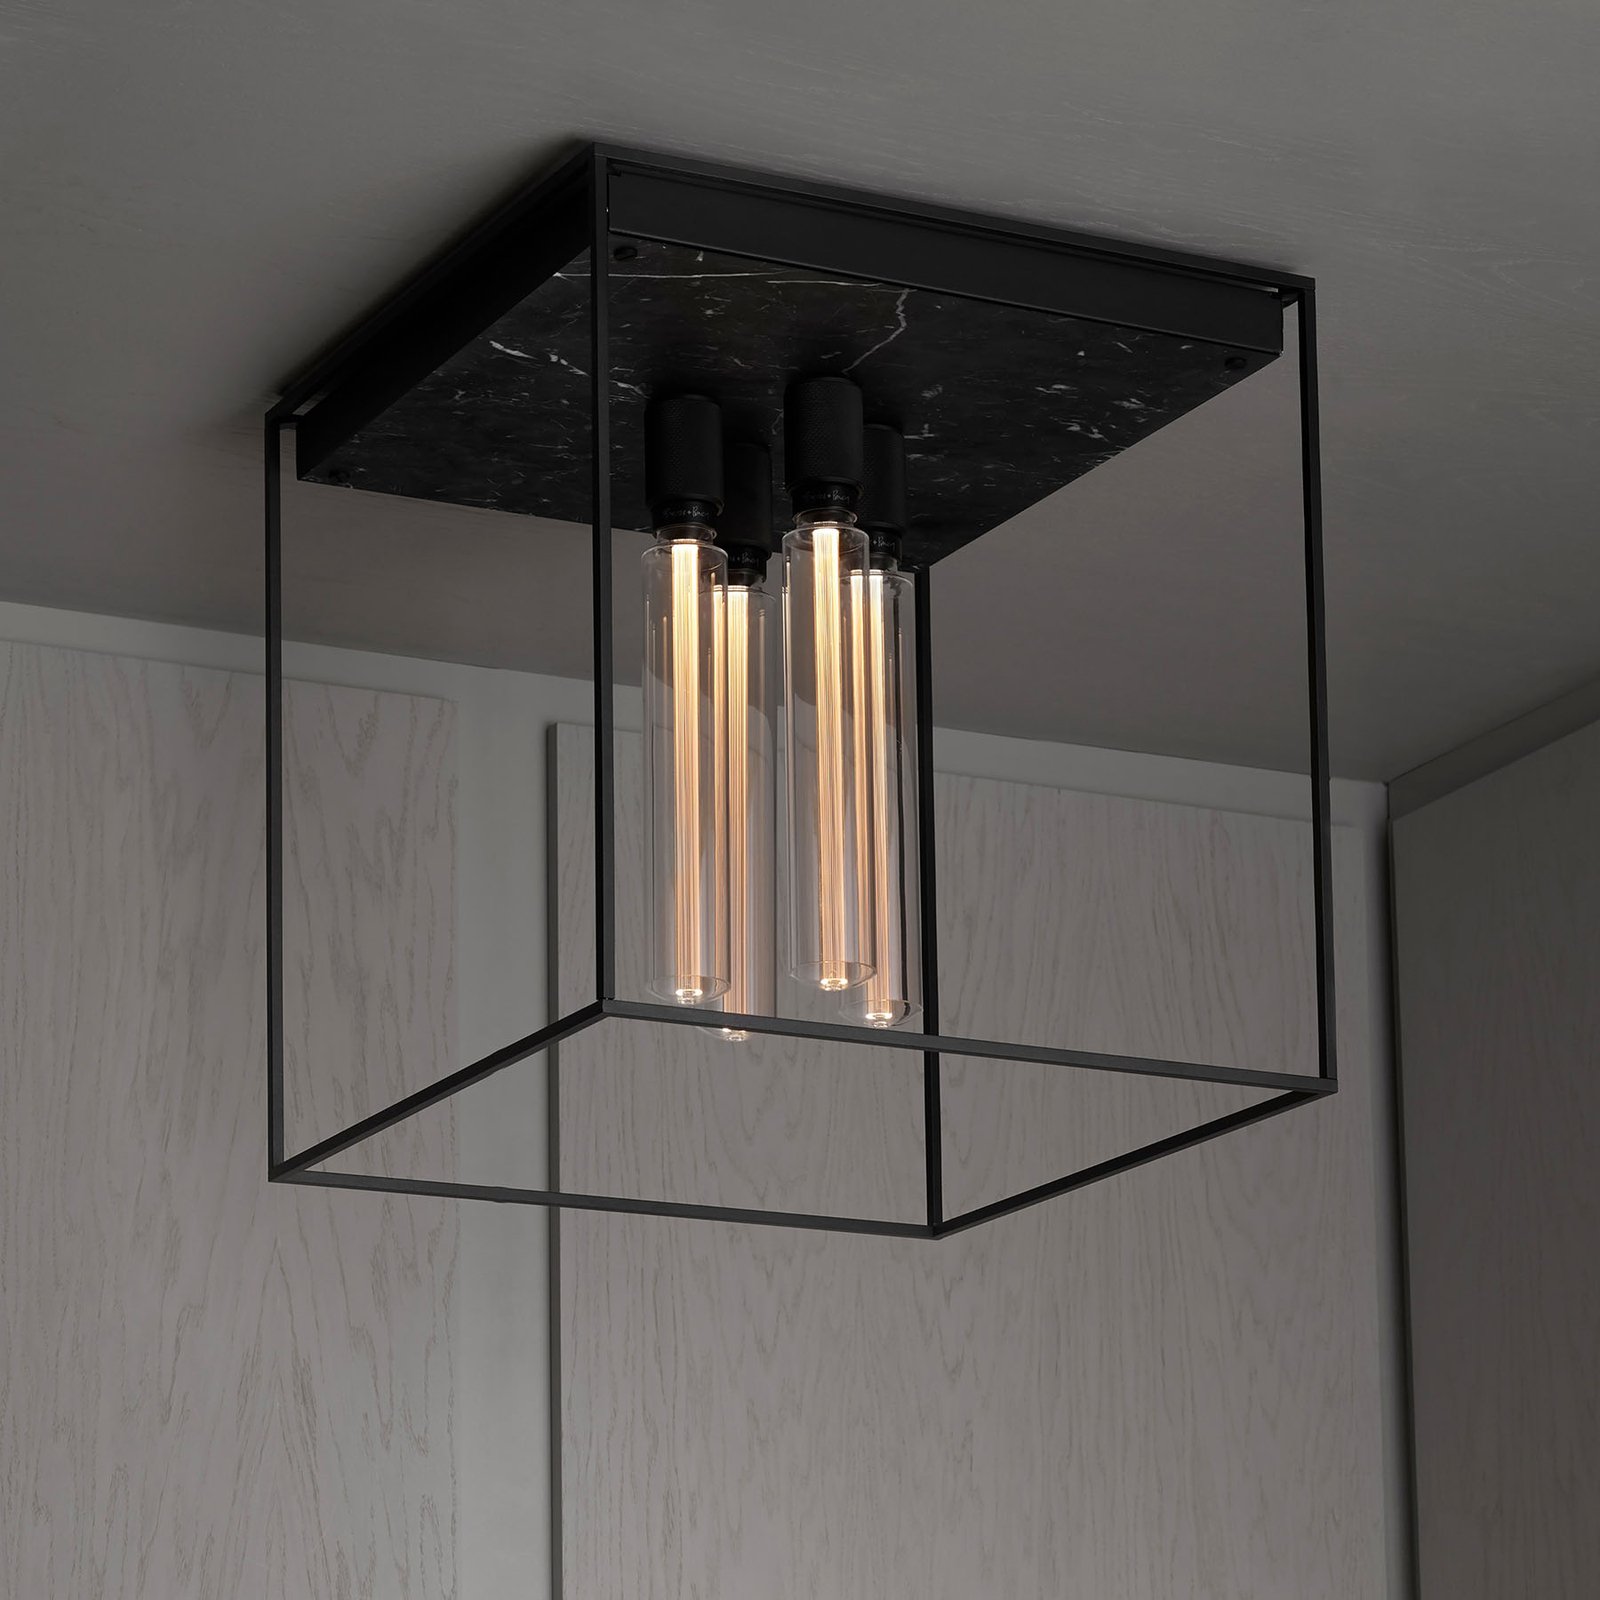 Buster + Punch Caged Ceiling 4.0 LED marble black